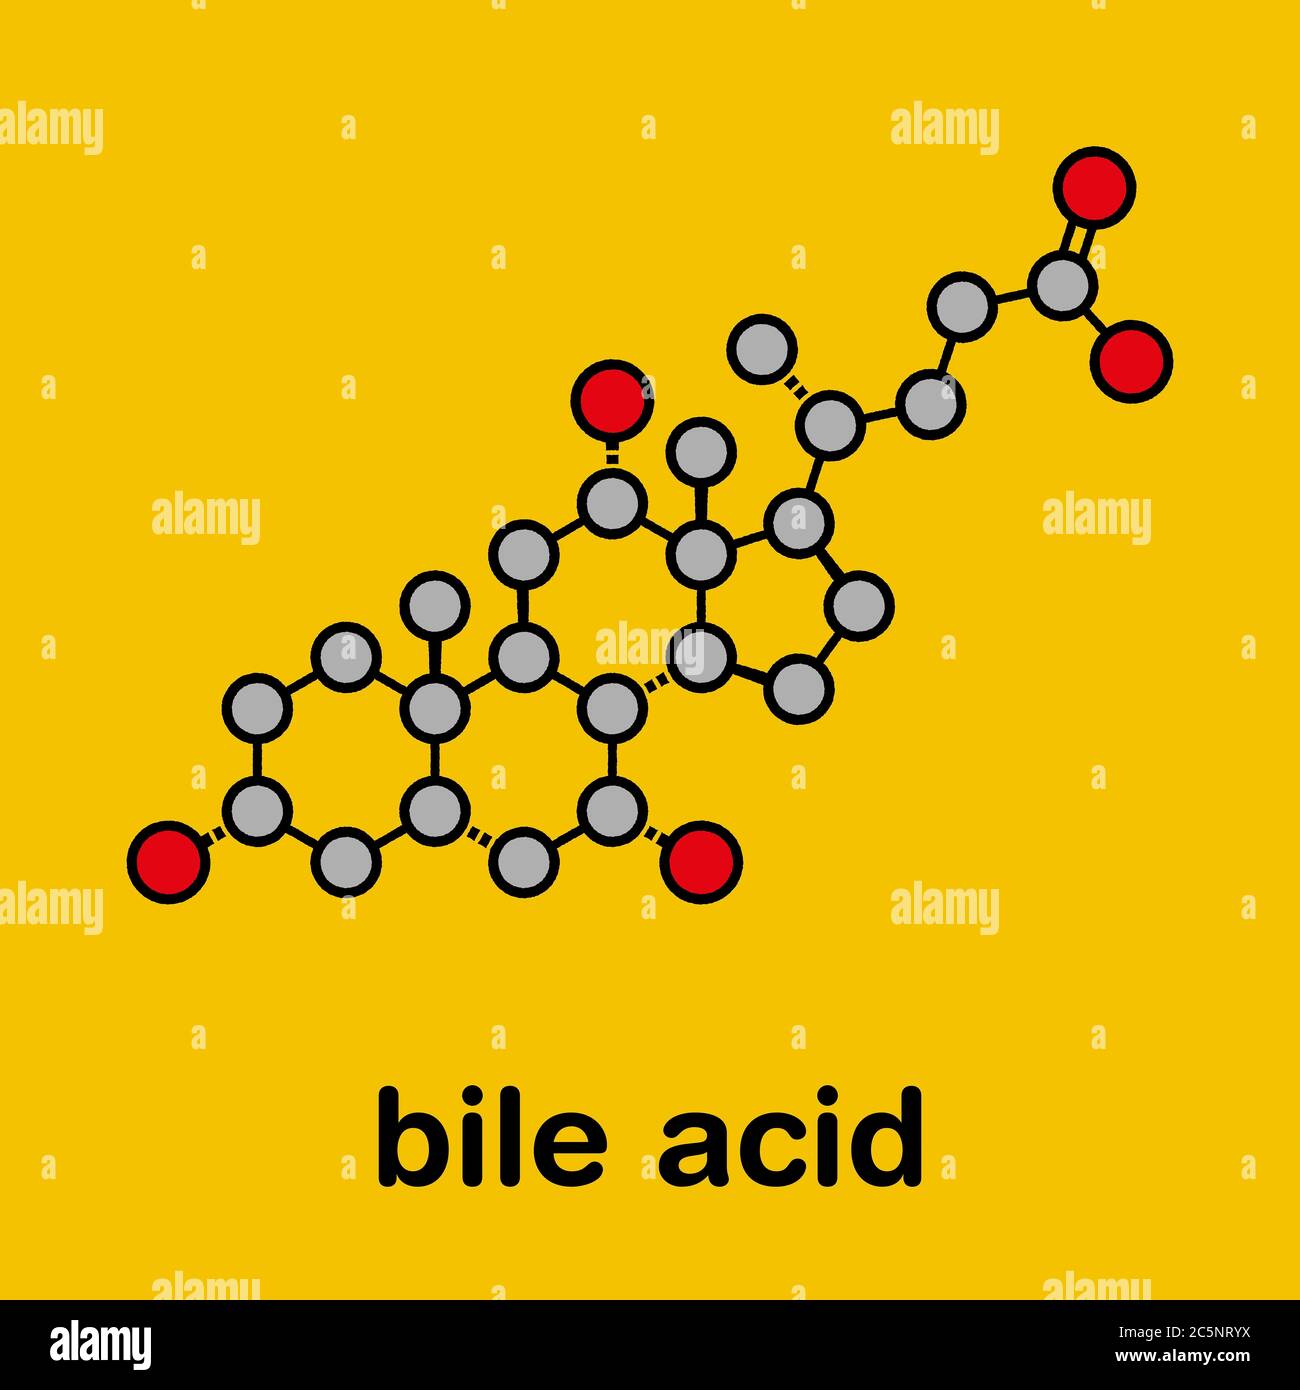 Bile acid (cholic acid, cholate) molecule. Cholic acid is the main bile acid in humans. Stylized skeletal formula (chemical structure): Atoms are shown as color-coded circles: hydrogen (hidden), carbon (grey), oxygen (red). Stock Photo